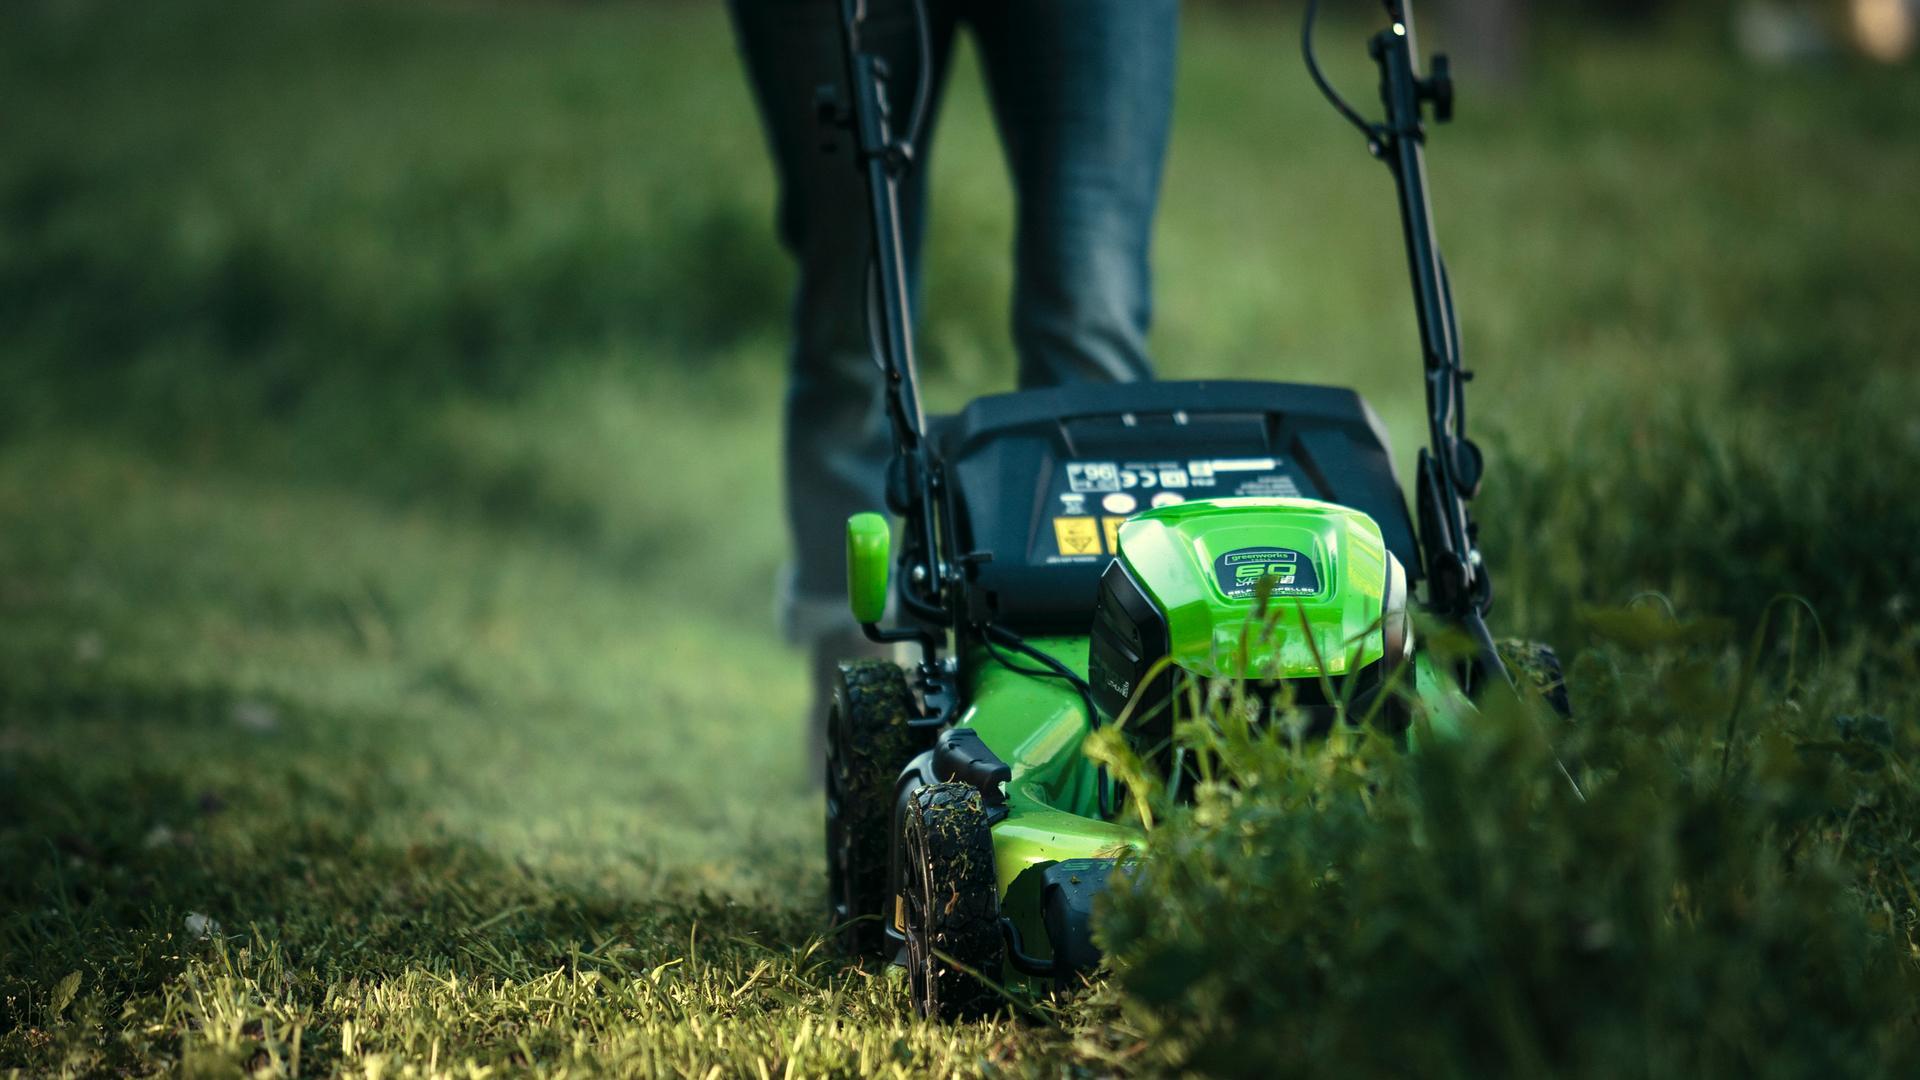 Best cordless lawn mower 2019: these electric lawnmowers are